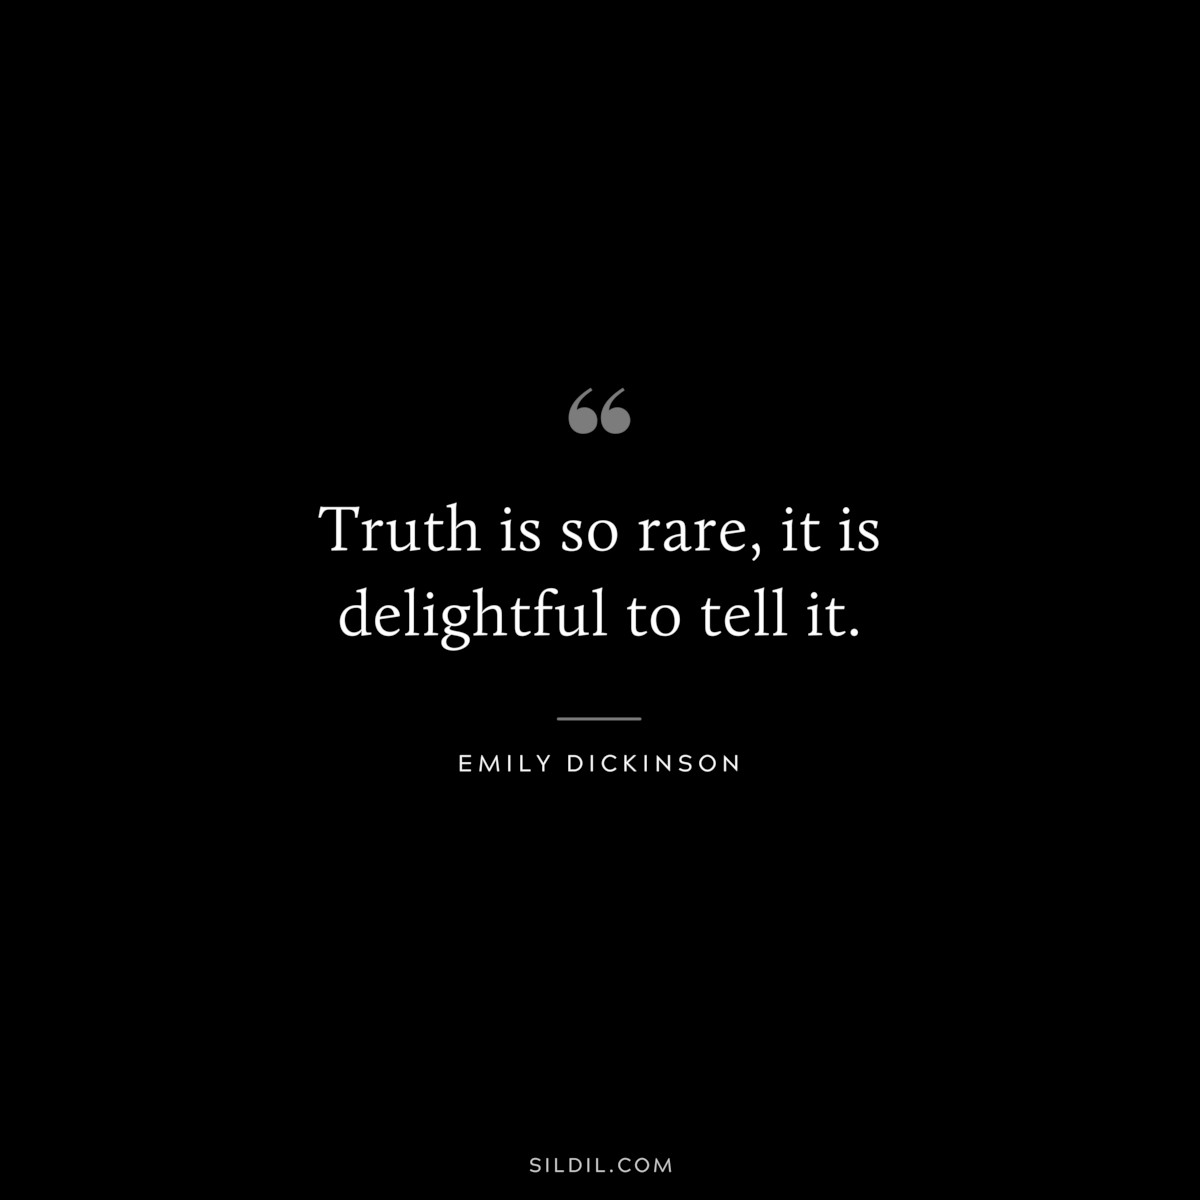 Truth is so rare, it is delightful to tell it.